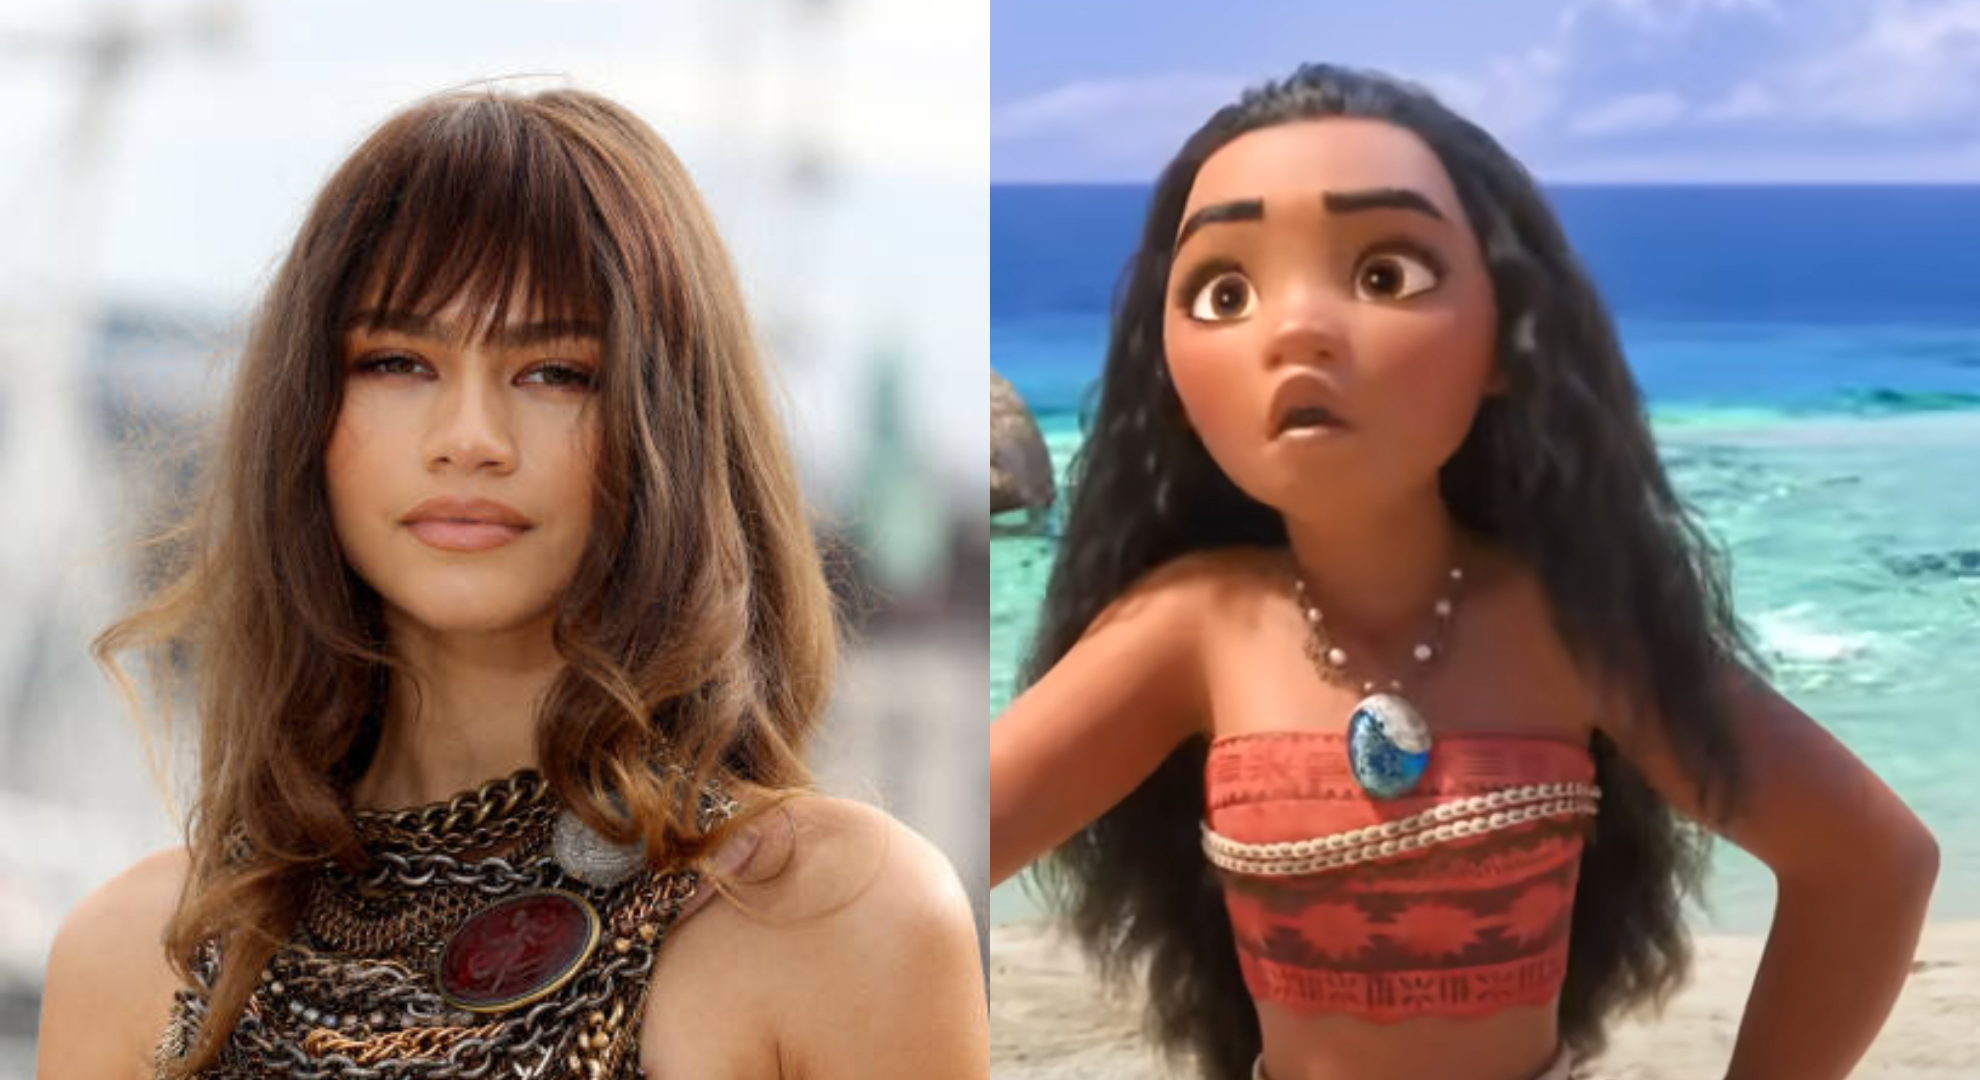 Has Disney Cast Zendaya as the Live Action Moana? Find out the Truth Behind the Rumors! 21